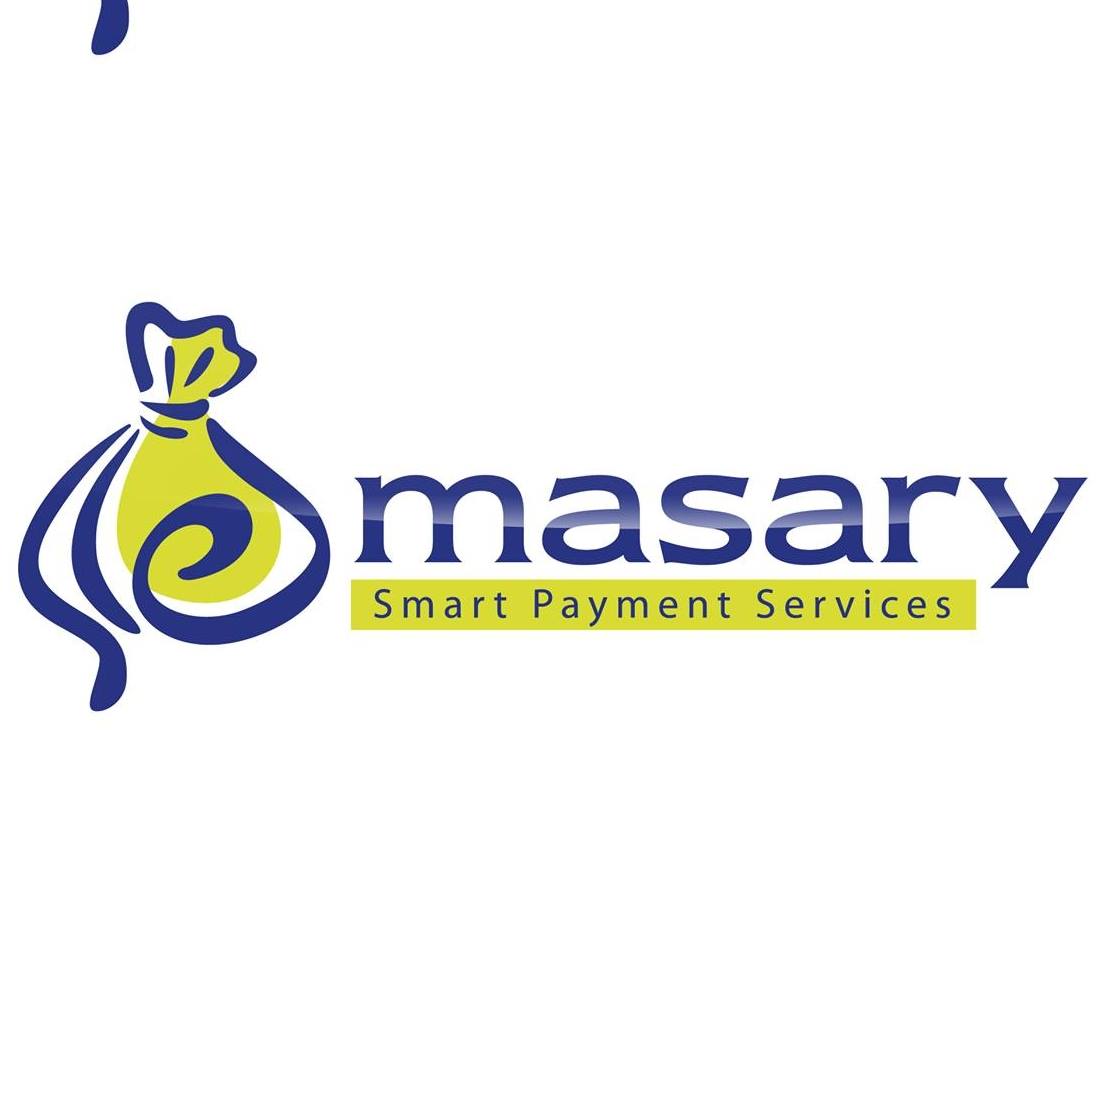 Masary for E-Payment services